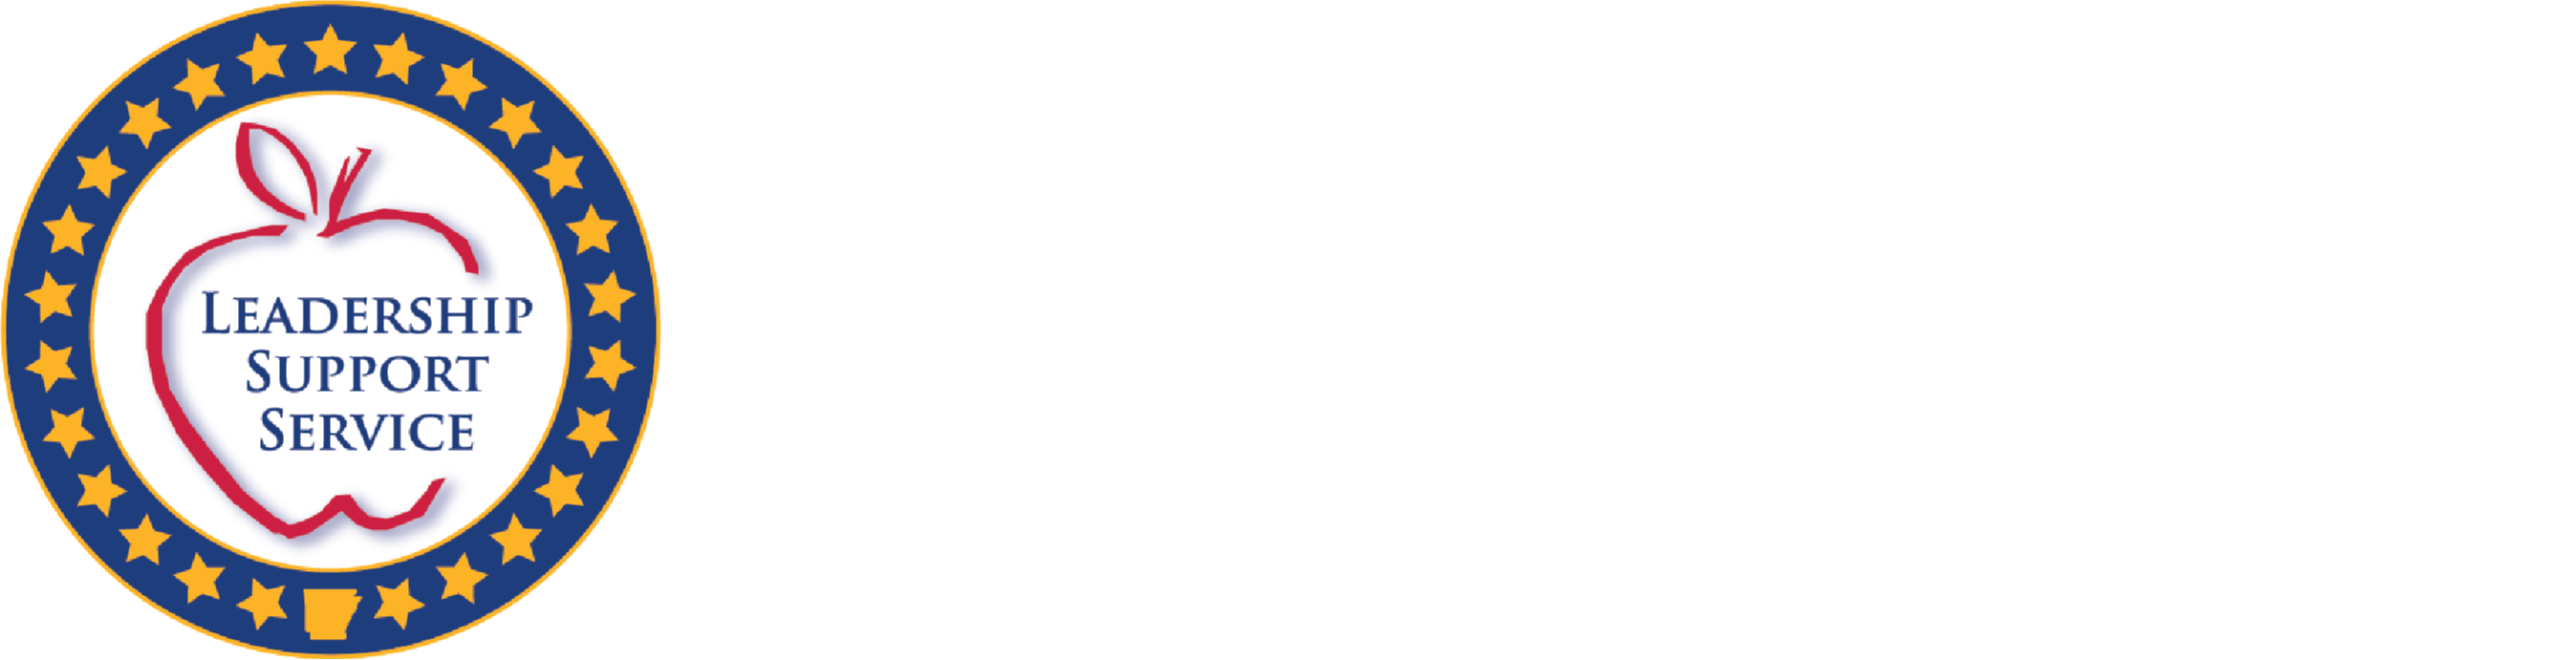 dese state required information